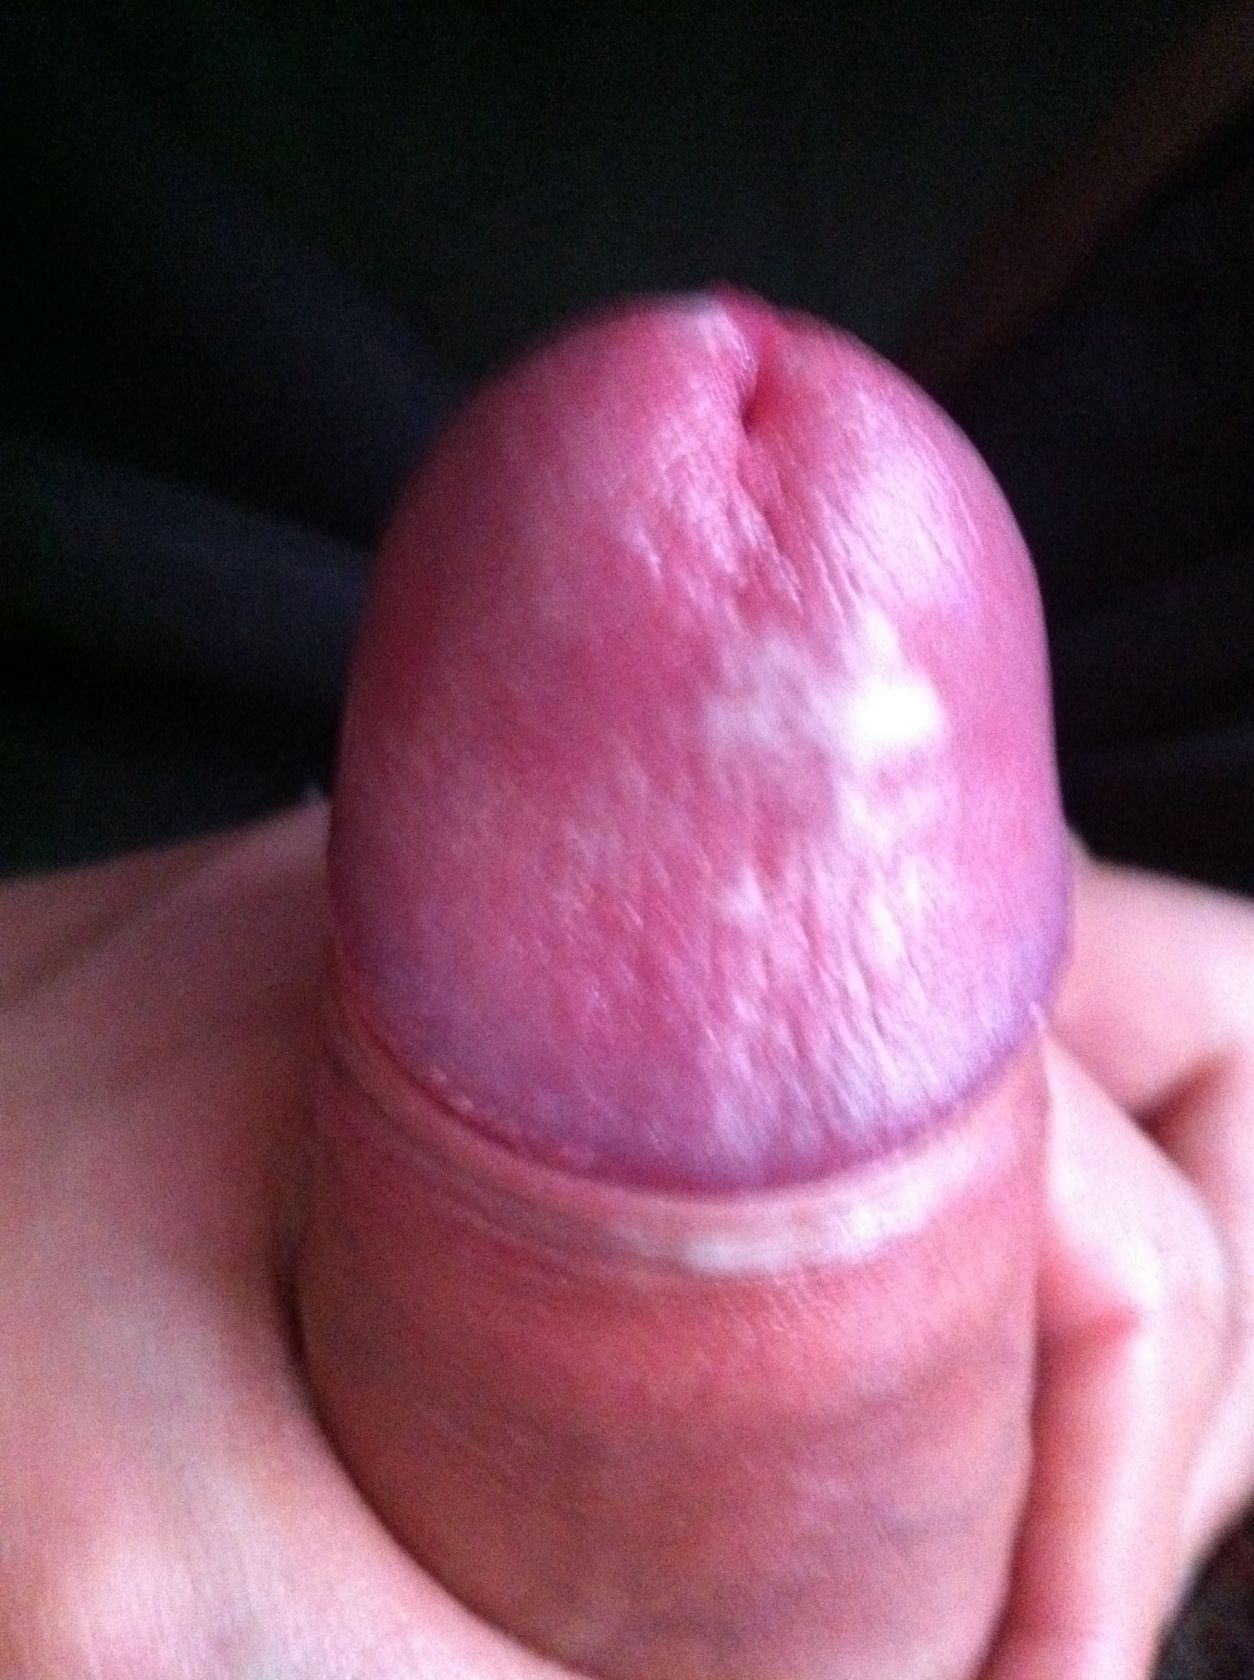 My cock1